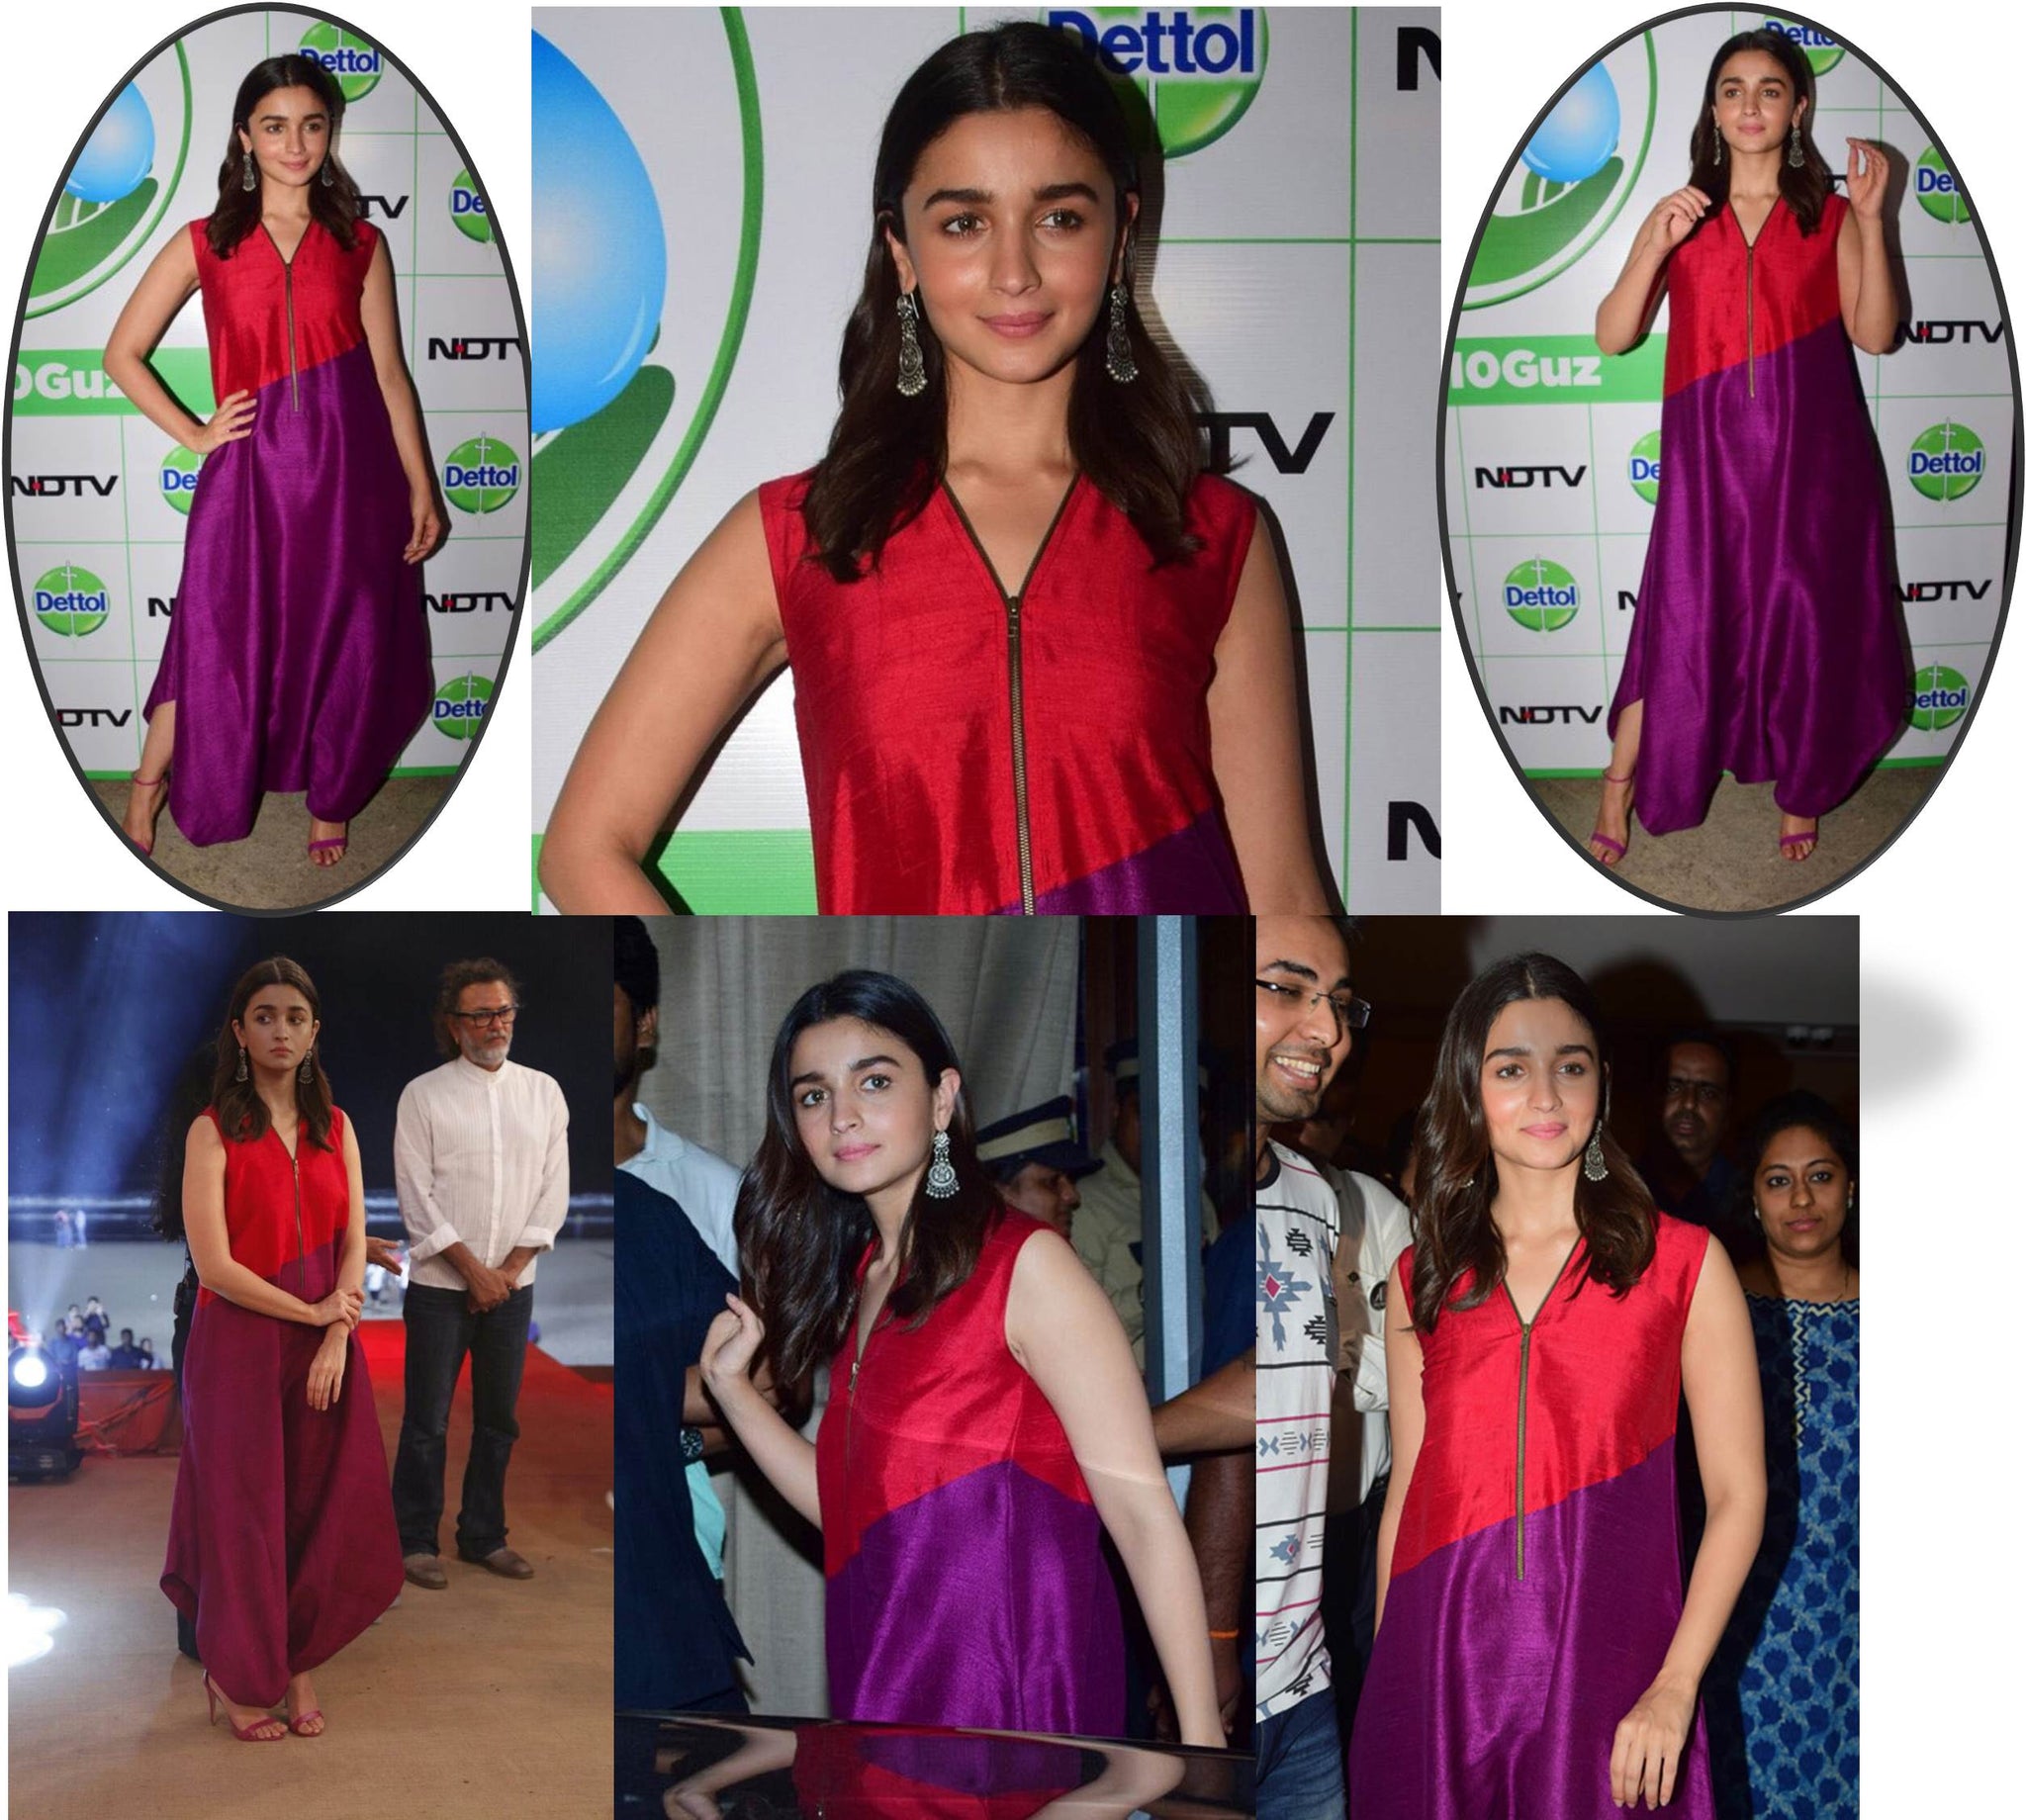 Alia Bhatt attended the Cleanathon India campaign event in Mumbai earlier today.